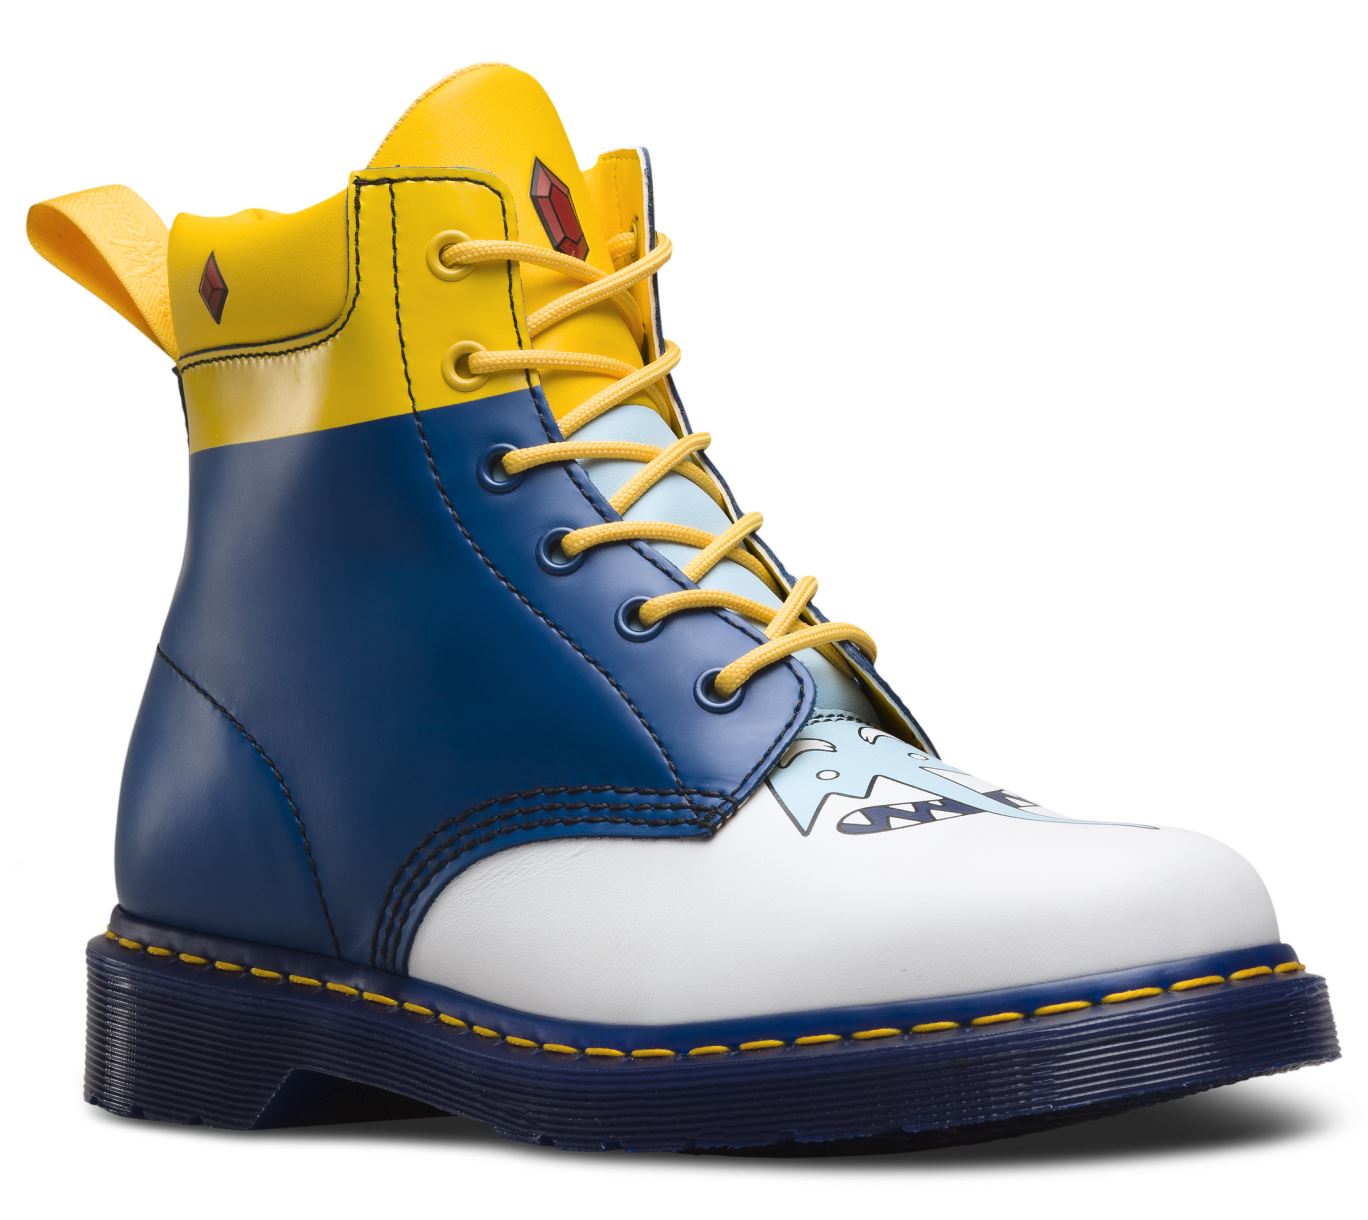 939 KING ADVENTURE BOOT – Posers Hollywood